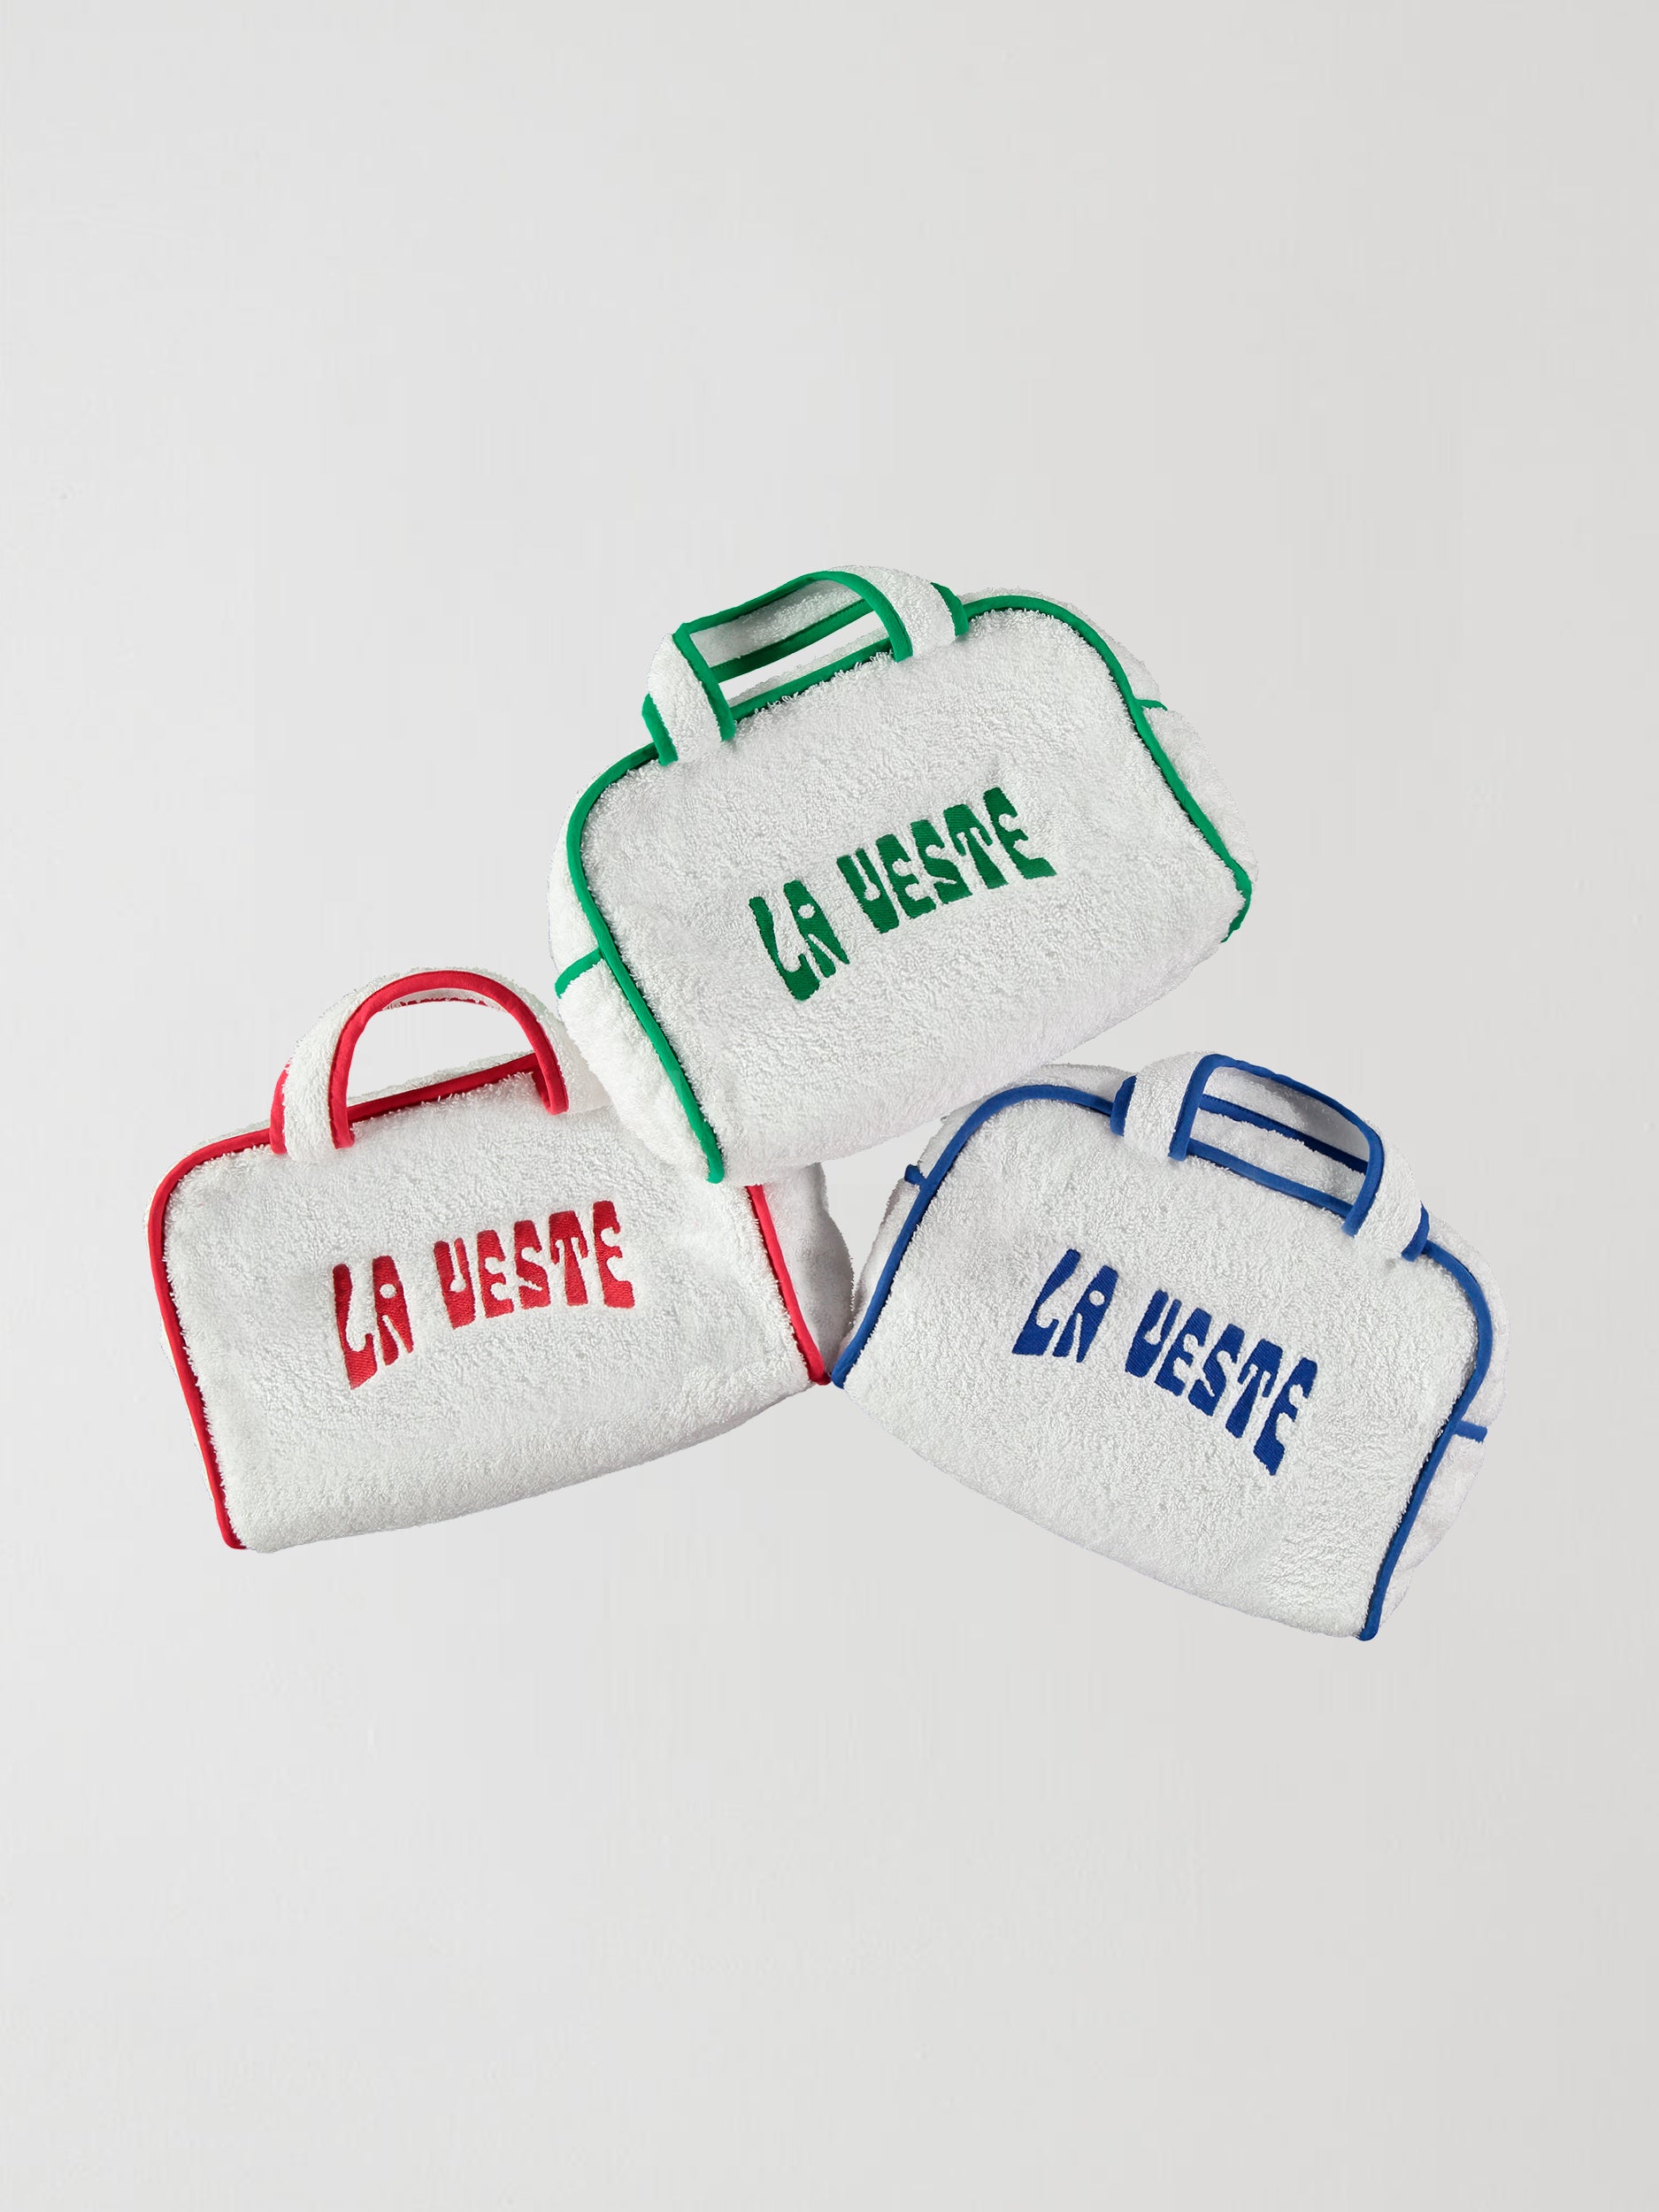 Bags made of cotton terry cloth with the La Veste logo in different colors.